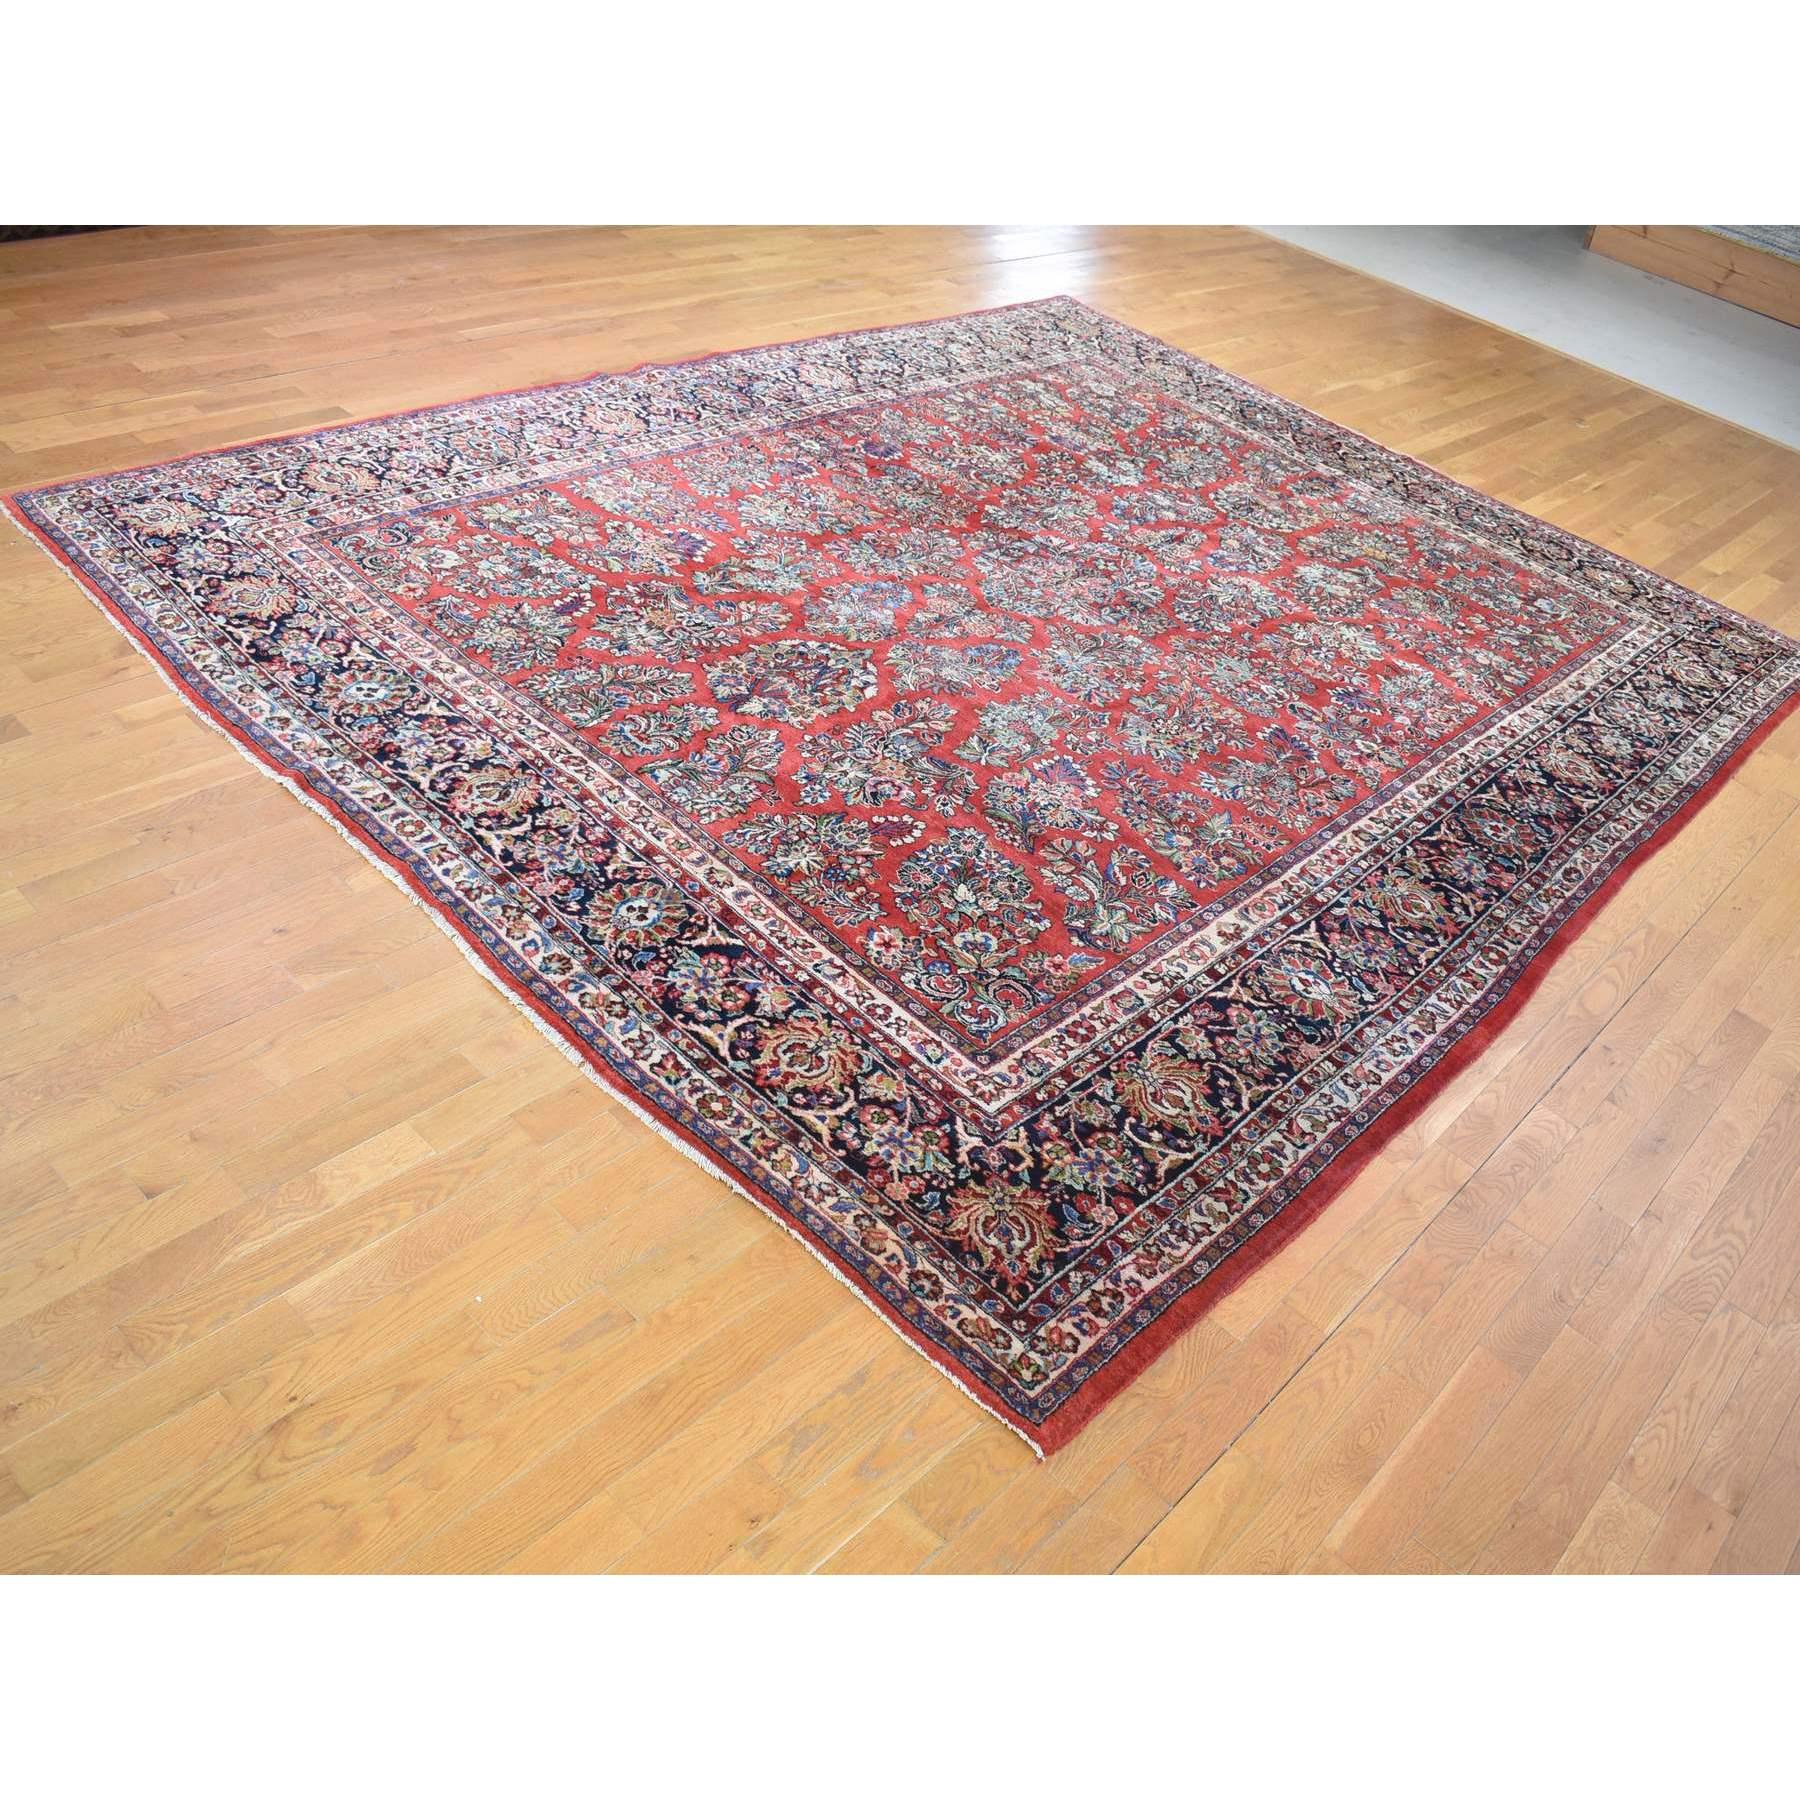 This fabulous hand-knotted carpet has been created and designed for extra strength and durability. This rug has been handcrafted for weeks in the traditional method that is used to make
Exact Rug Size in Feet and Inches : 10'5